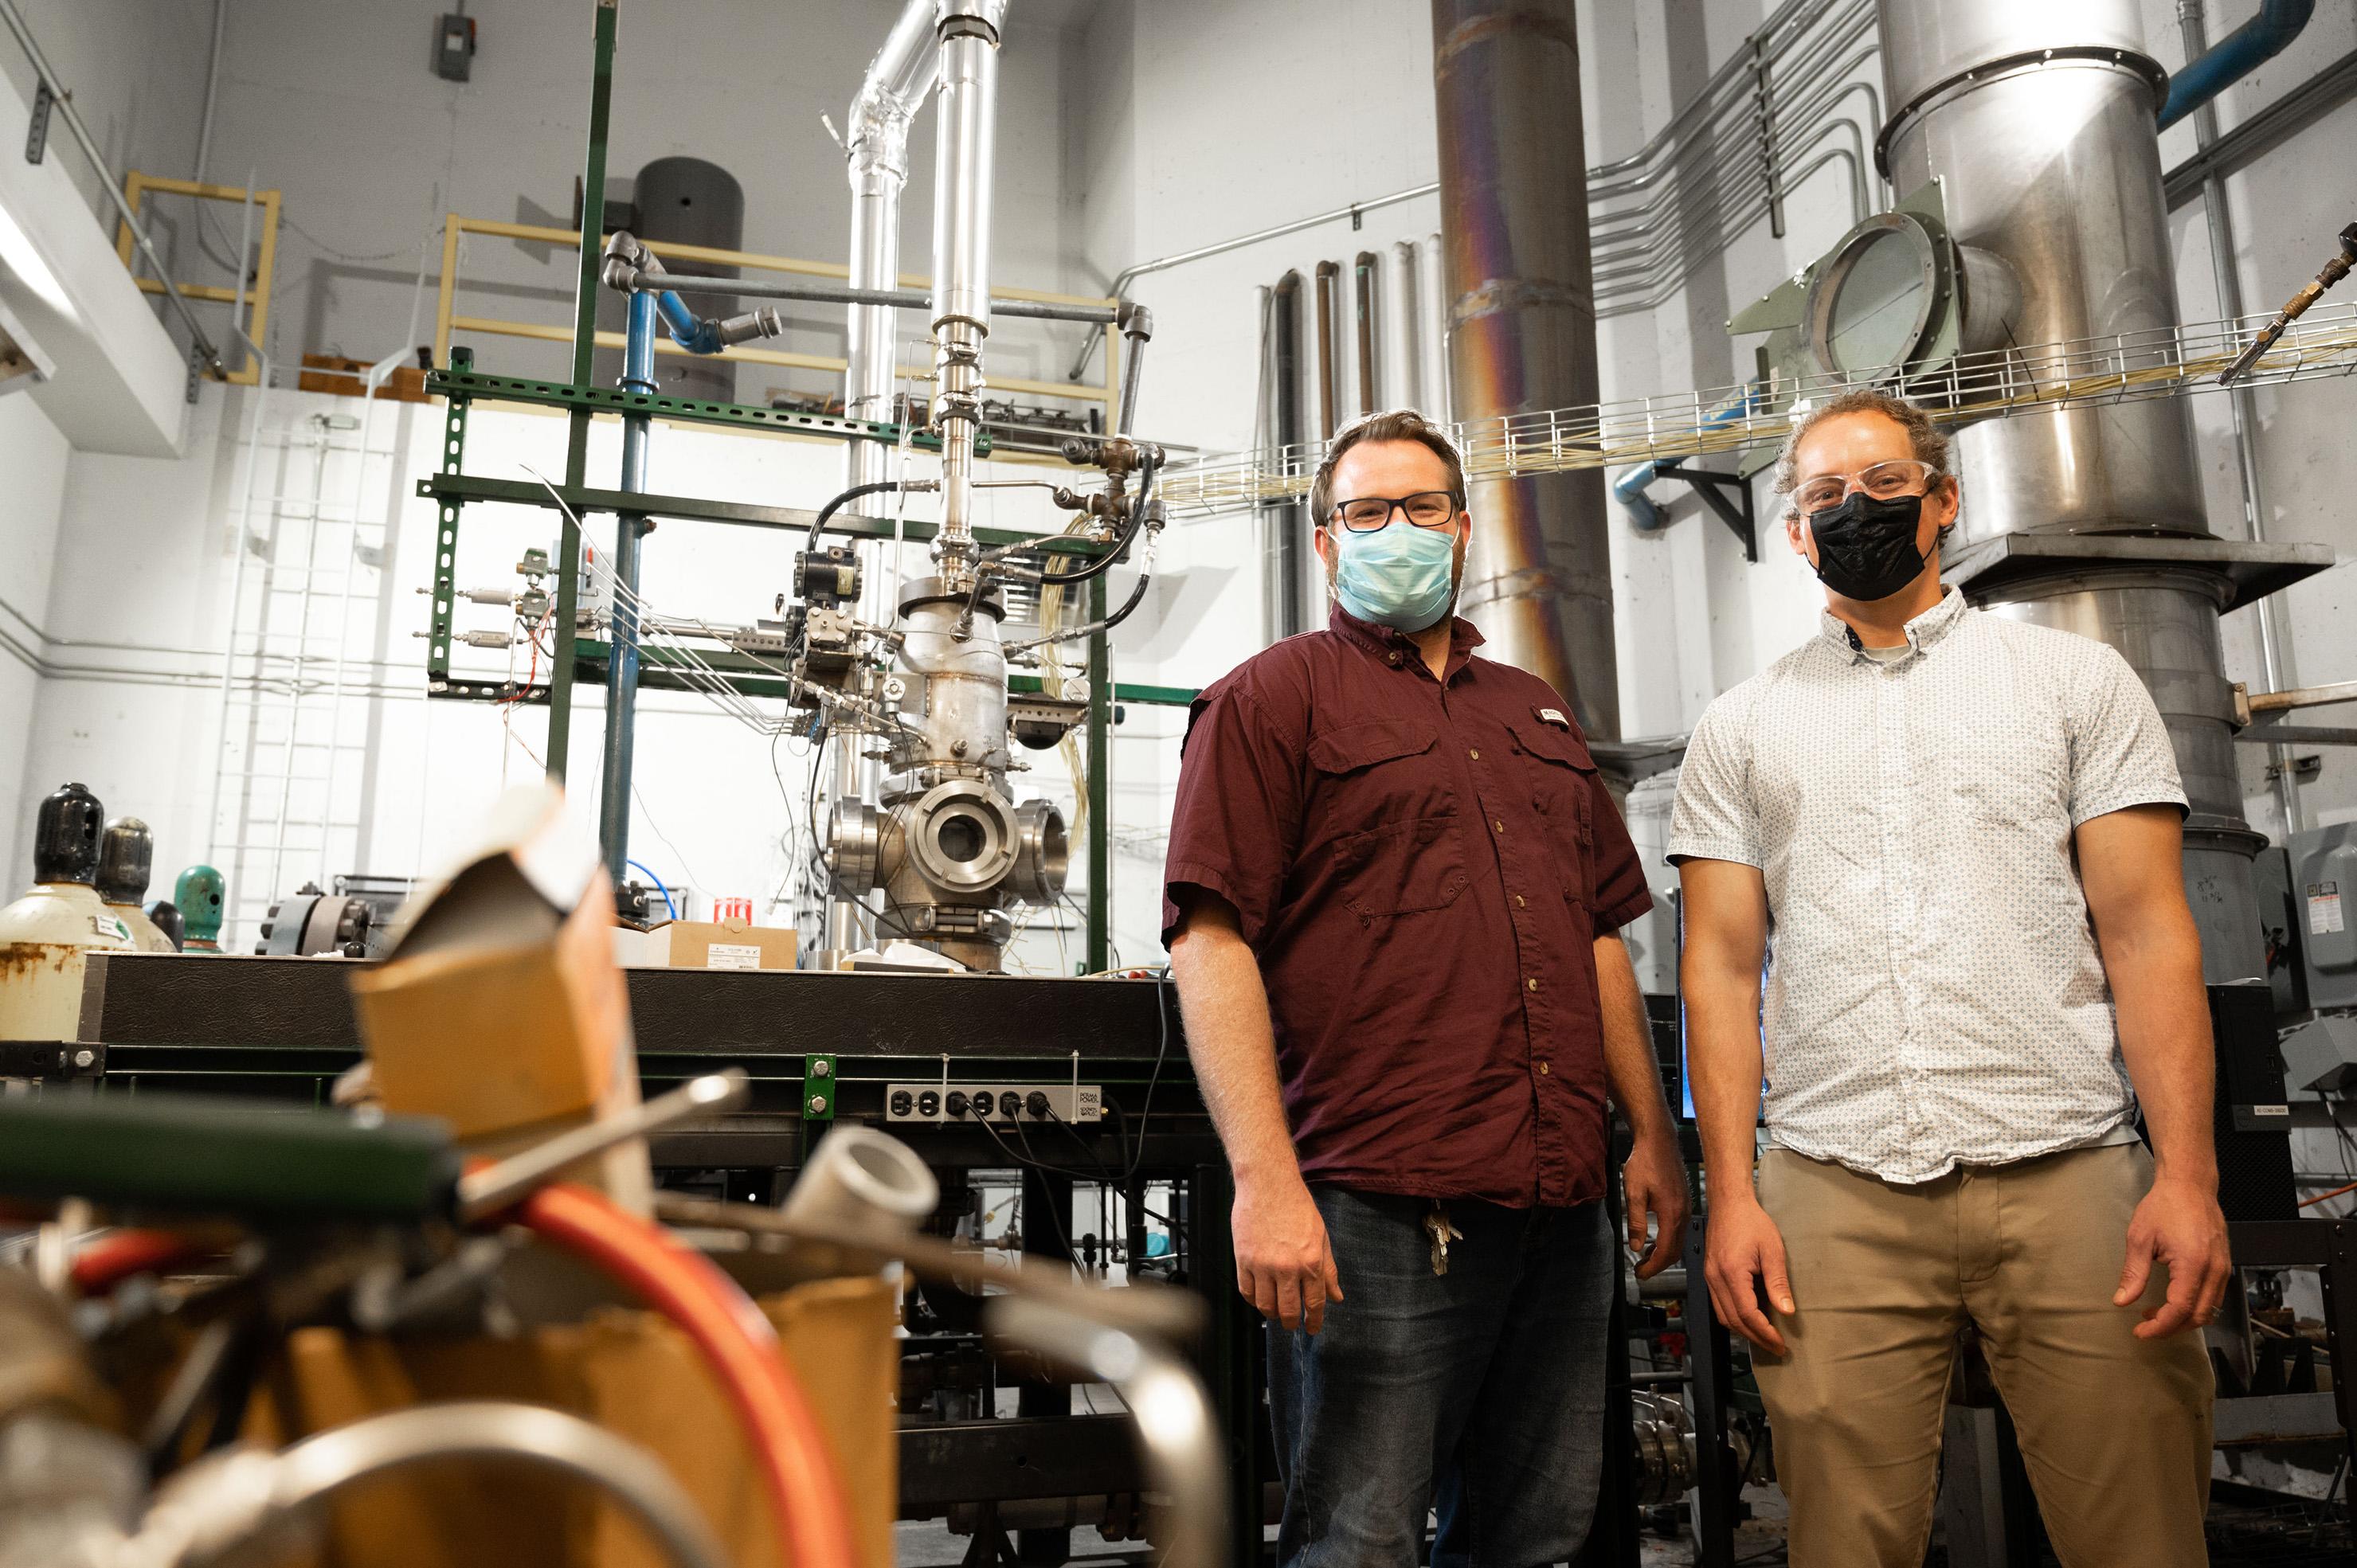 Kristopher Manion, lab manager, and Ben Emerson, research engineer, stand in front of a combustion experiment at the Ben T. Zinn Combustion Lab. Image Credit: Allison Carter/Georgia Tech